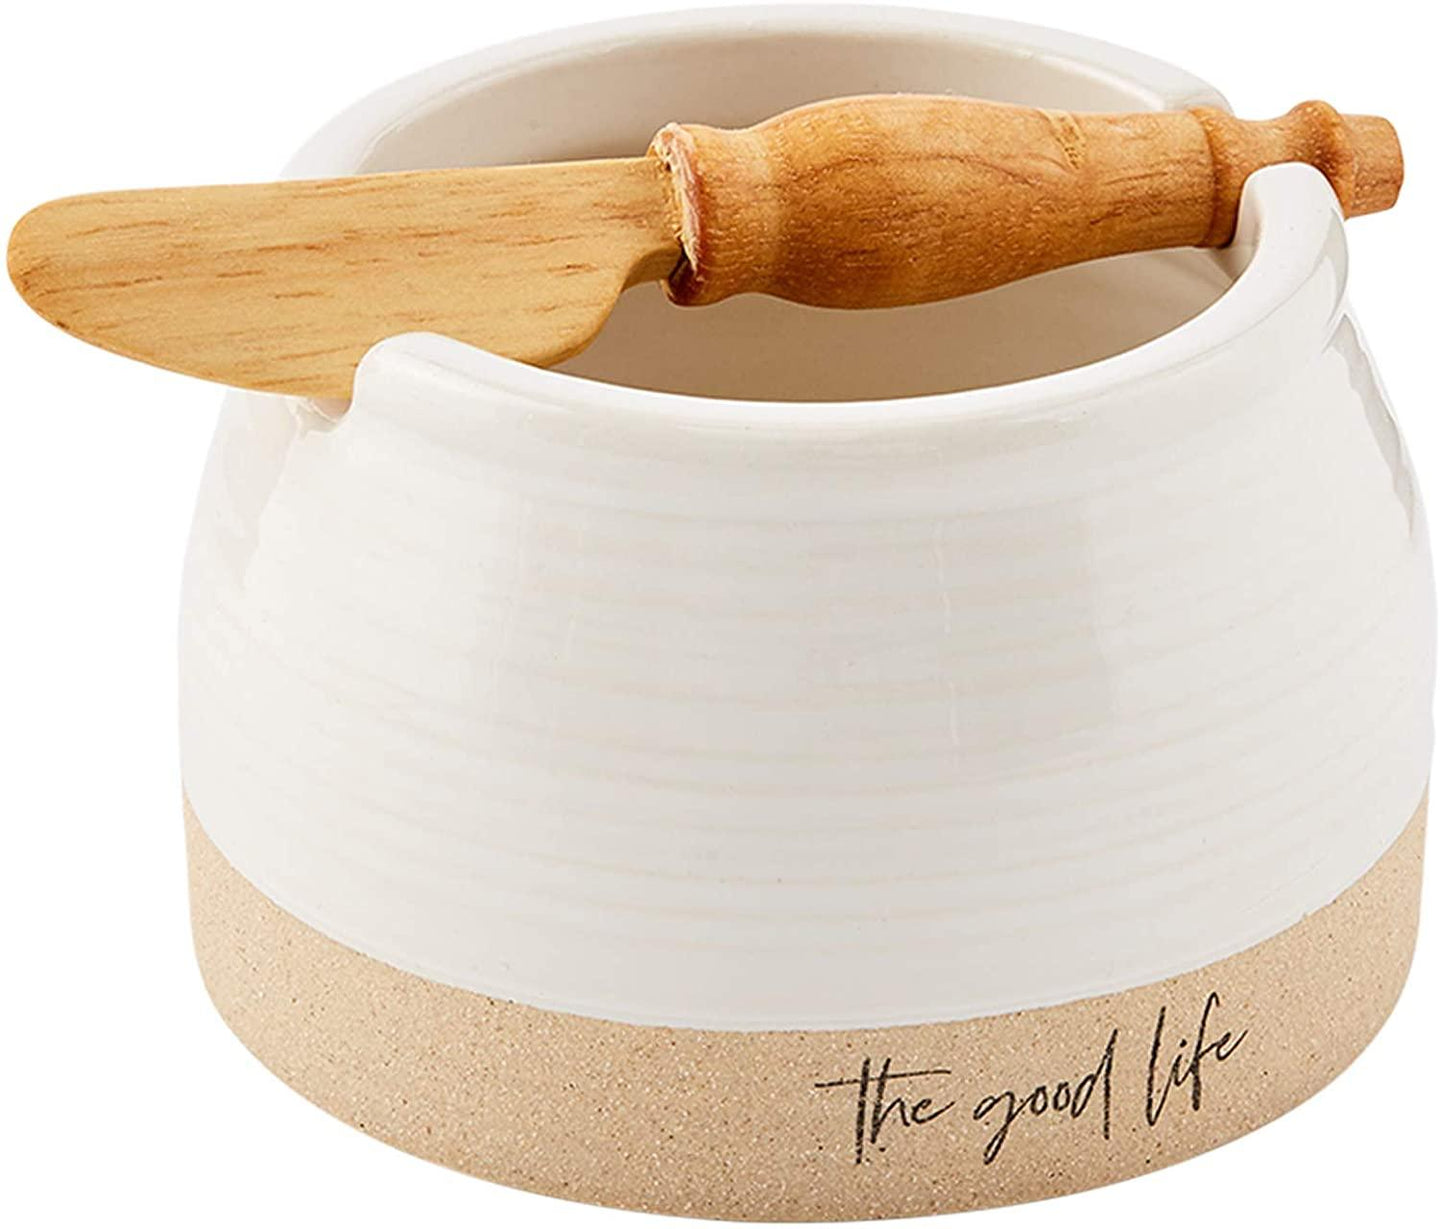 The Good Life Dip Bowl Set - Village Floral Designs and Gifts